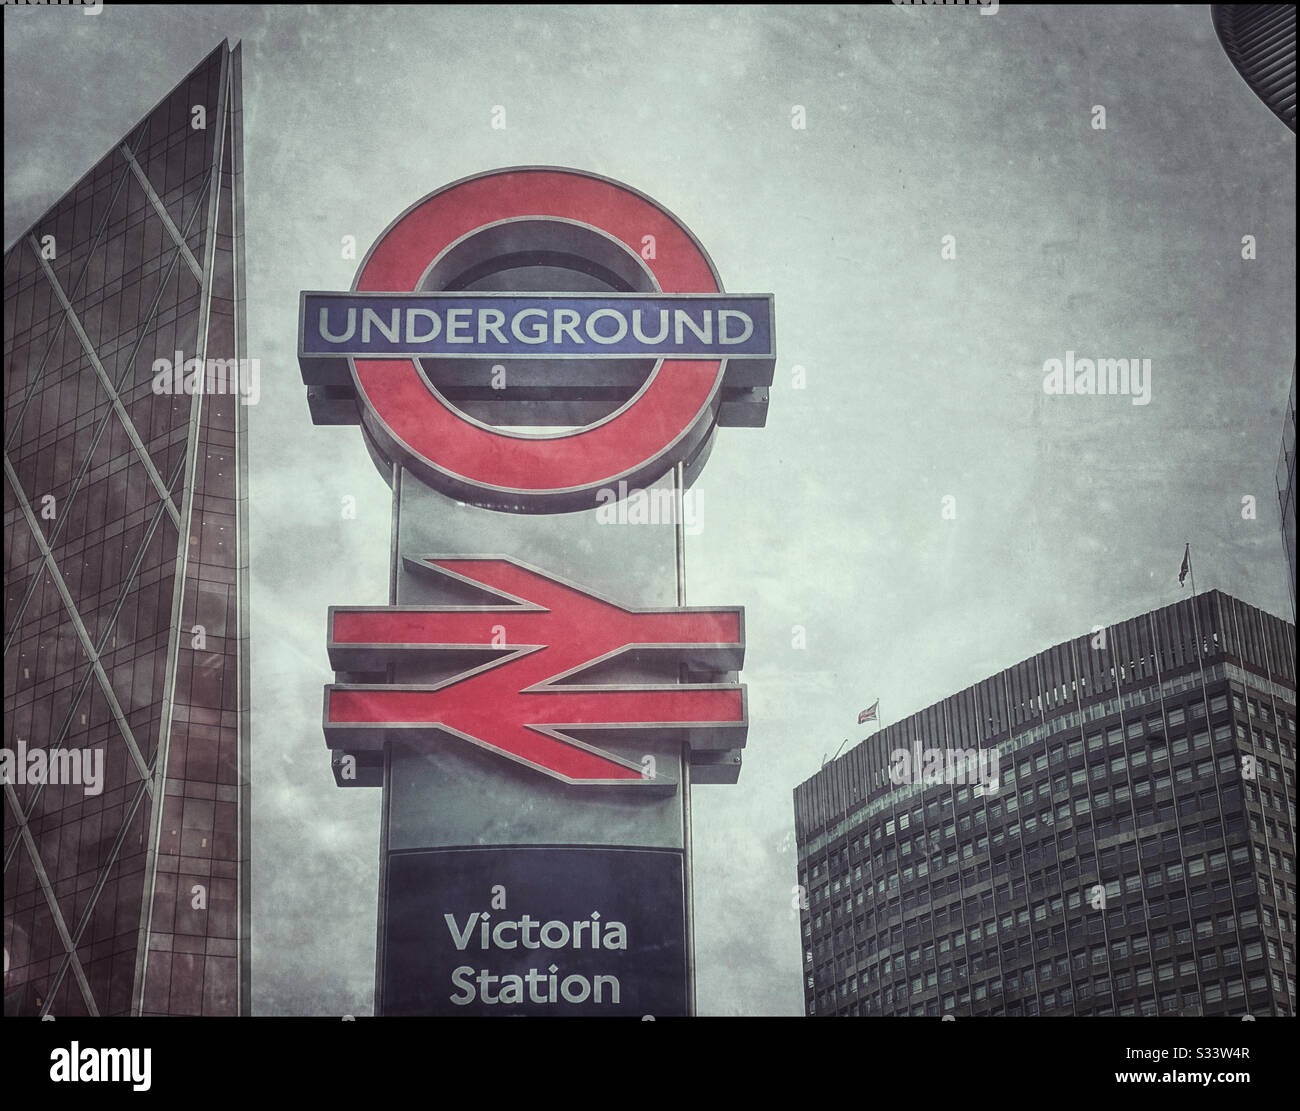 A grunge effect image of the iconic London Underground & British Rail logos at Victoria Station in central London, England. Photo Credit - © COLIN HOSKINS. Stock Photo